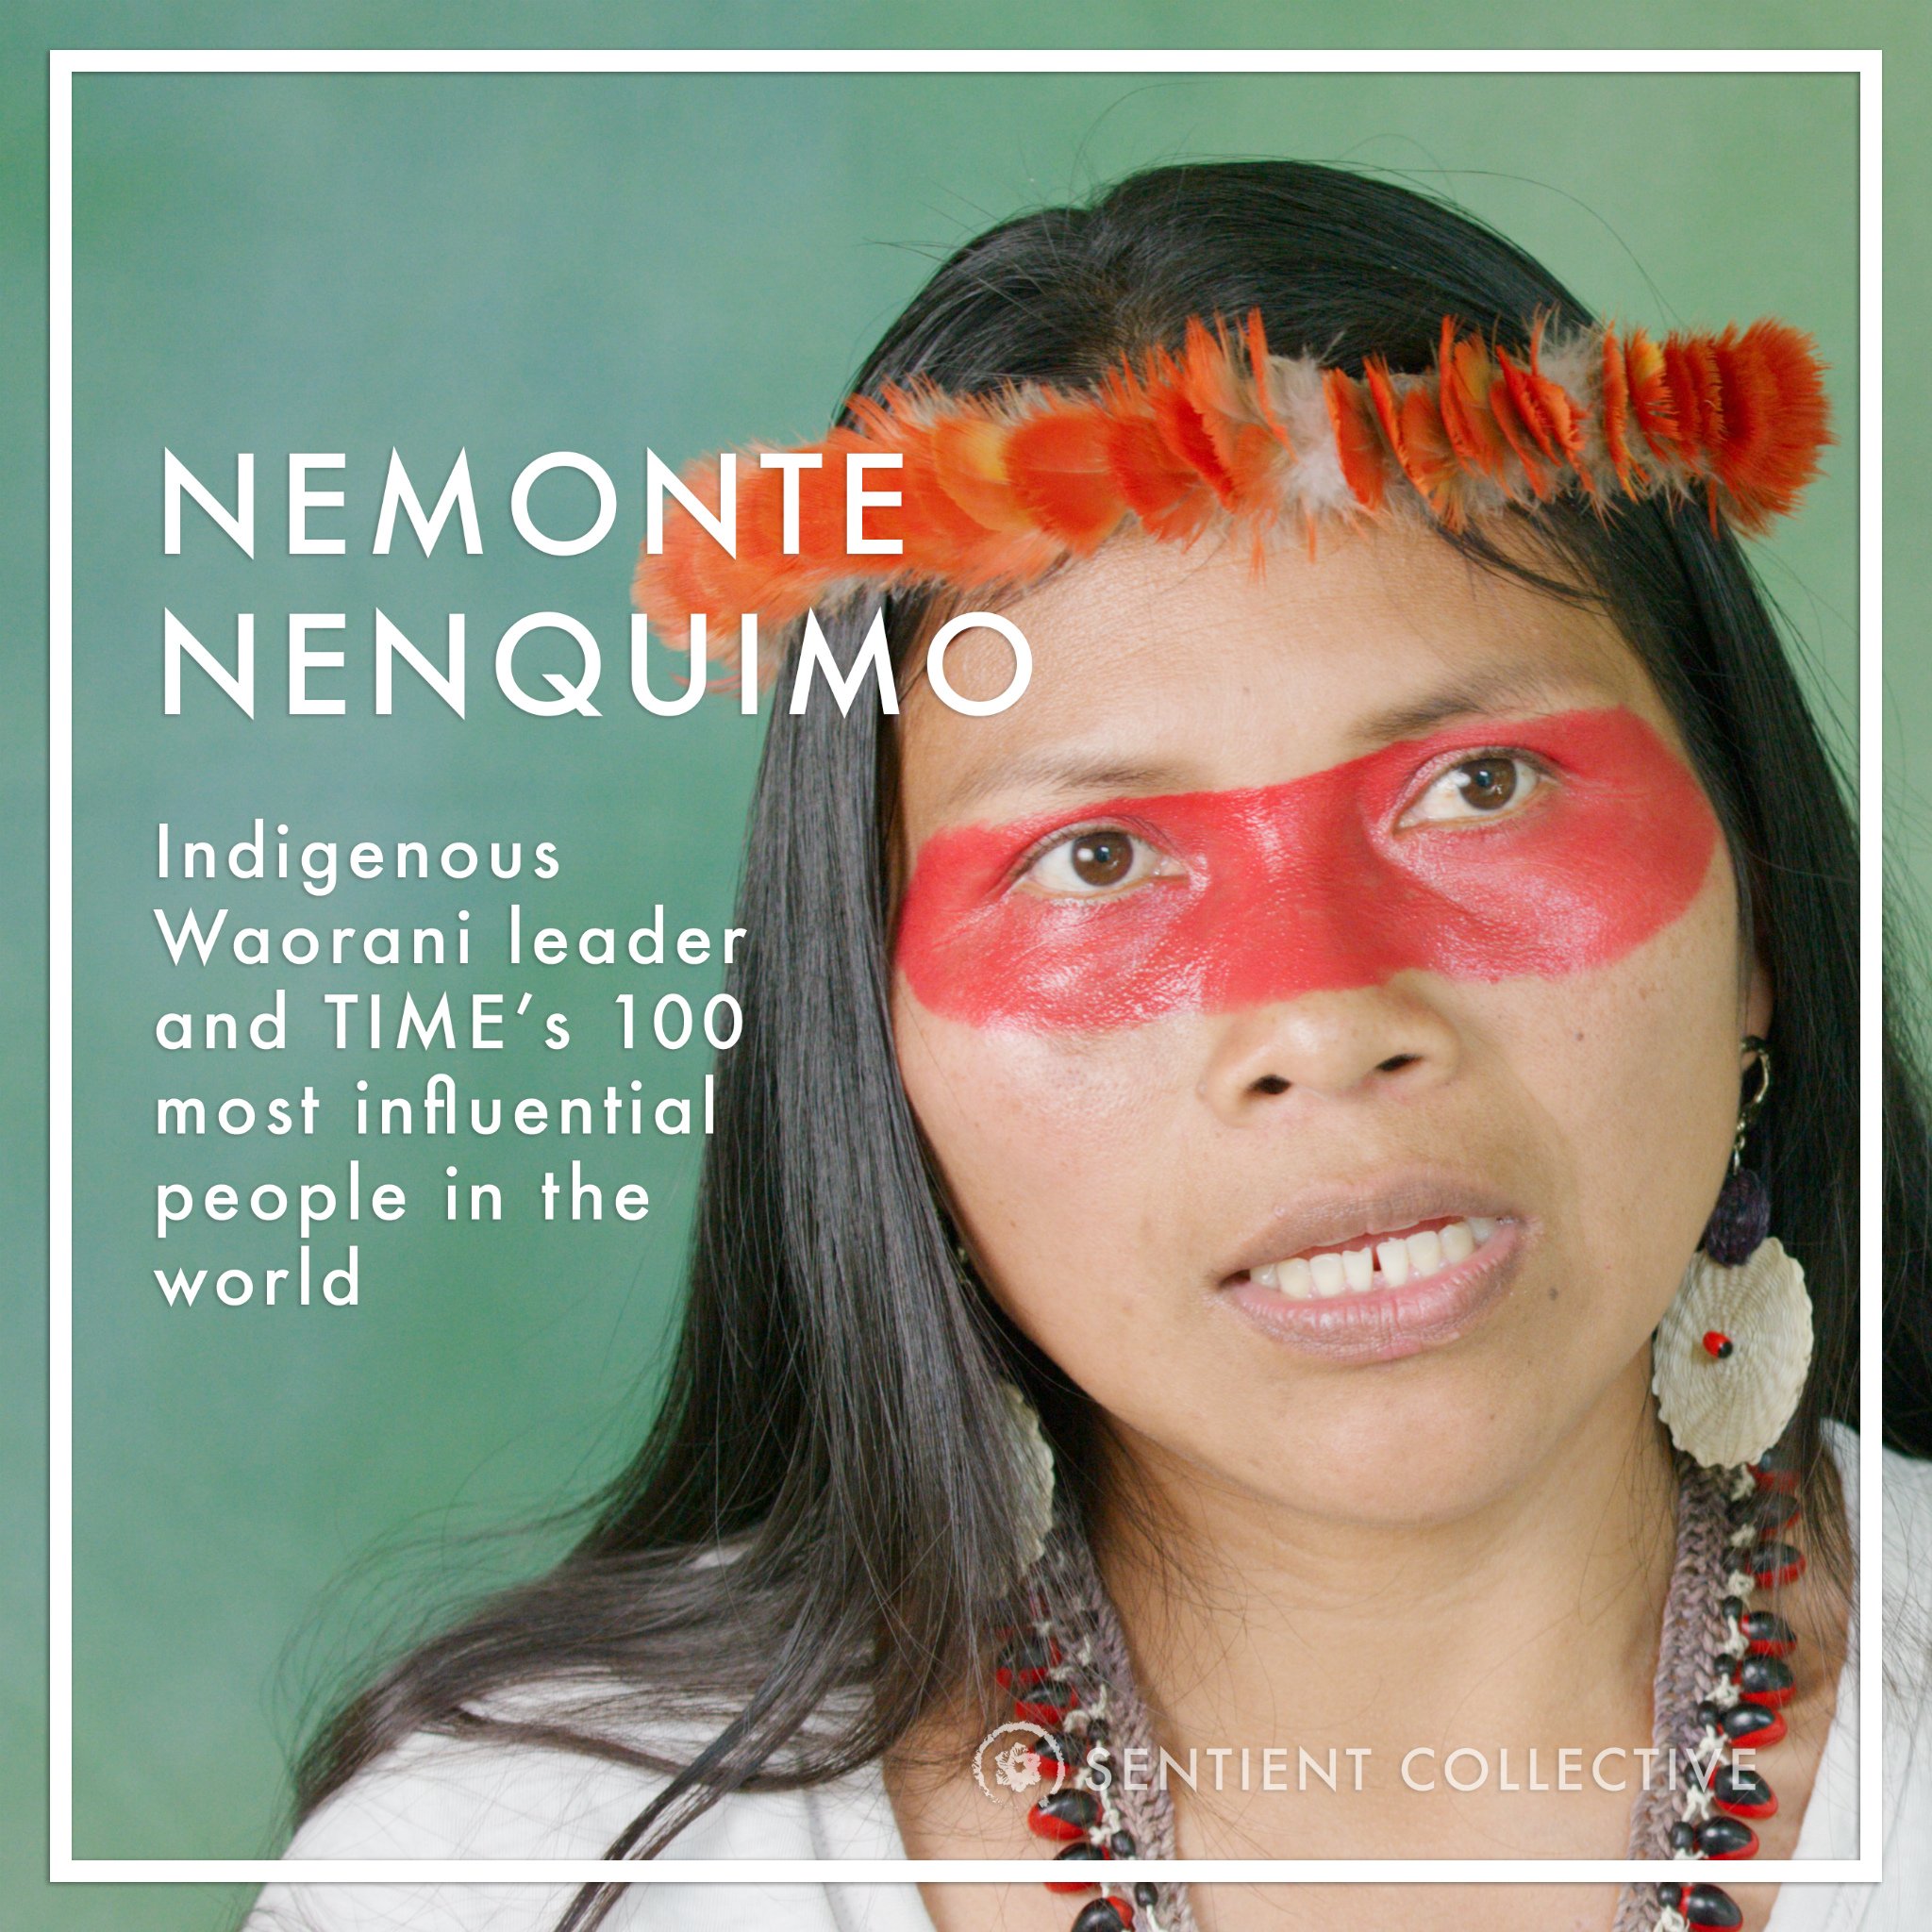 Worldview Documentary Film🎬
🆂🅴🅽🆃🅸🅴🅽🆃
.
Cast Intro:
𝗡𝗲𝗺𝗼𝗻𝘁𝗲 𝗡𝗲𝗻𝗾𝘂𝗶𝗺𝗼 (IG: @nemonte.nequimo)
Indigenous Waorani leader and TIME&rsquo;s 100 most influential people in the world 
.
Born into the Waorani community in the Ecuadoria